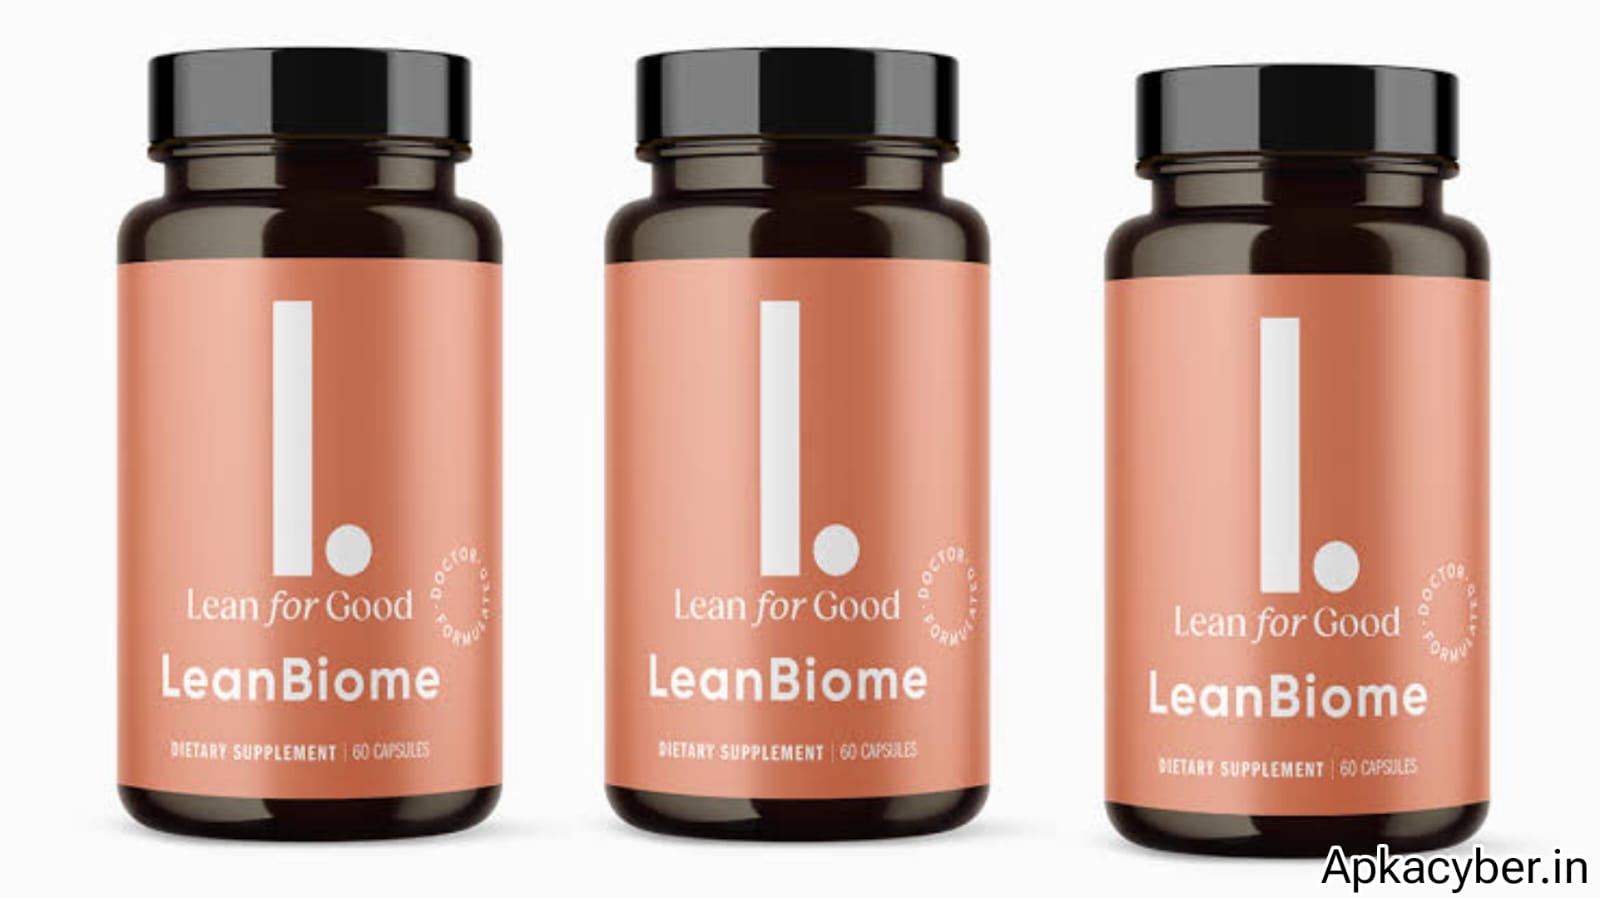 Review of LeanBiome